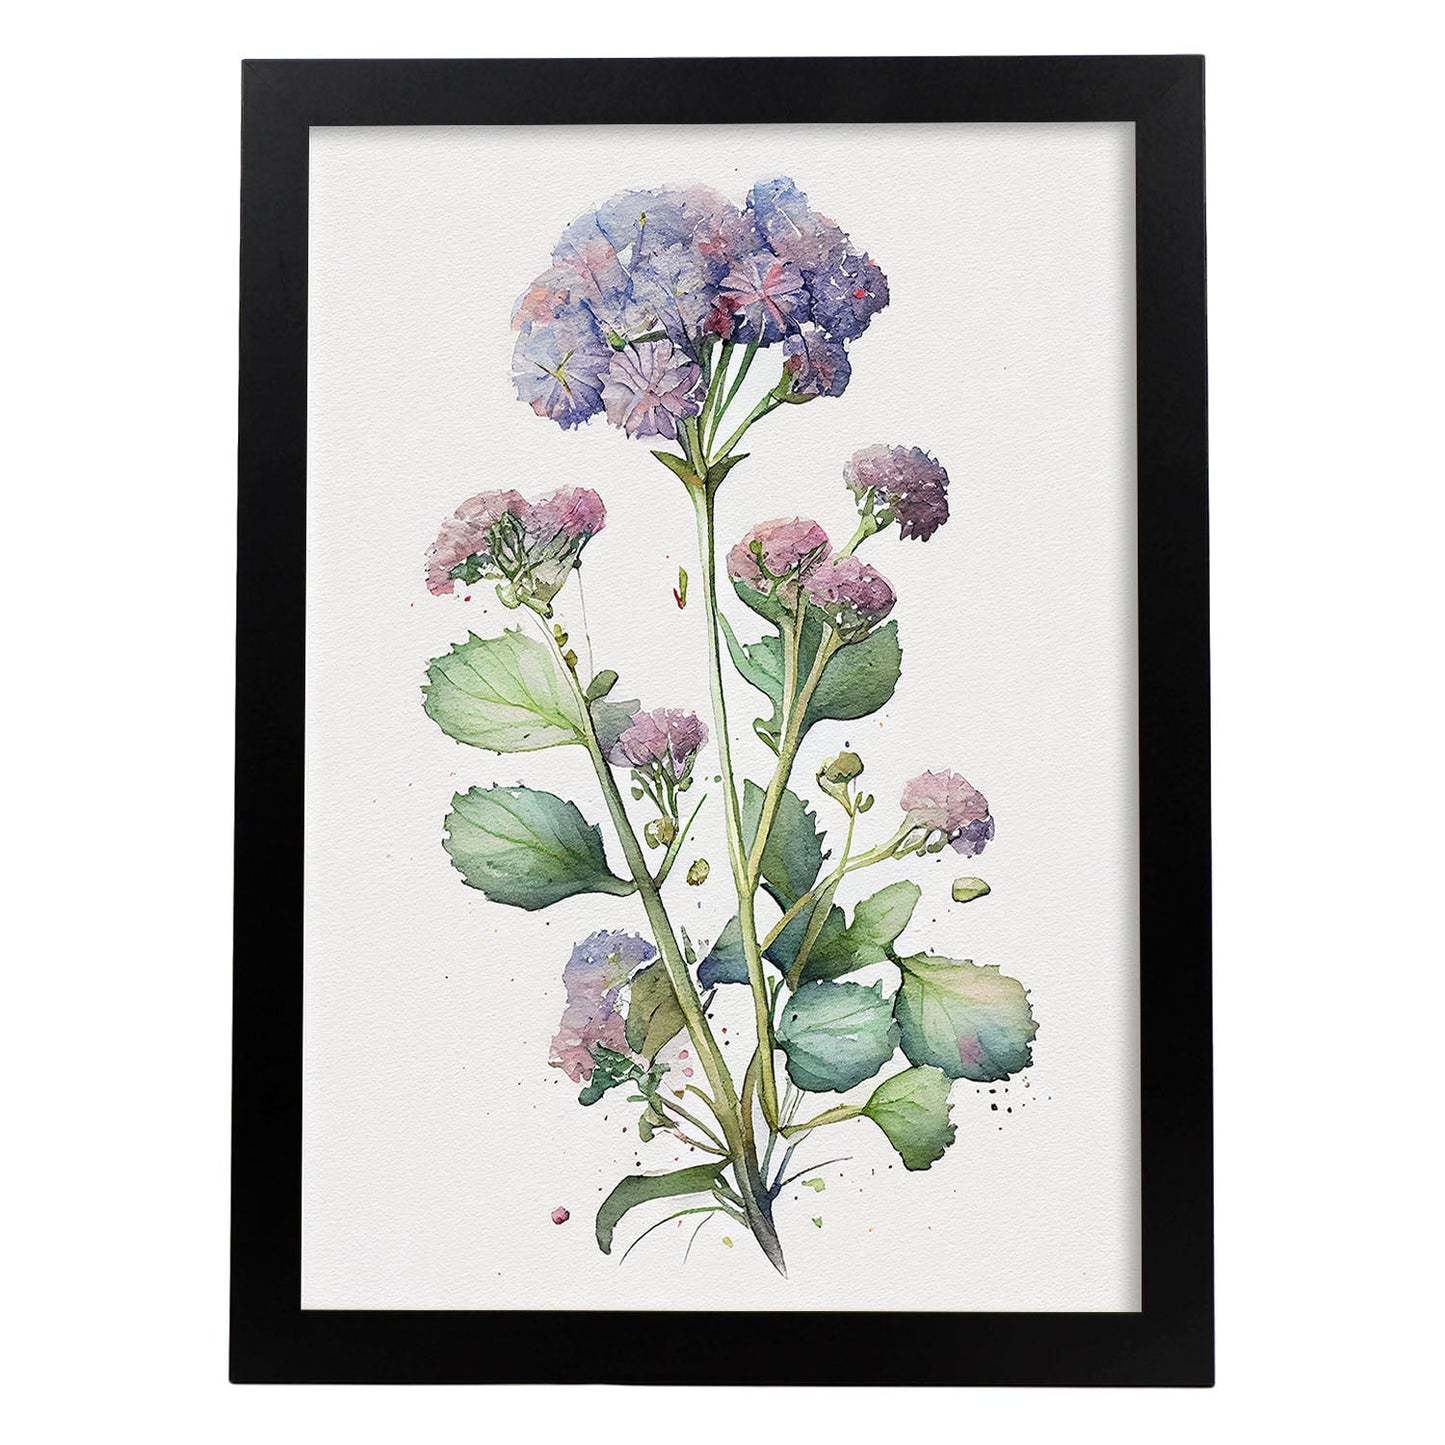 Nacnic watercolor minmal Ageratum_1. Aesthetic Wall Art Prints for Bedroom or Living Room Design.